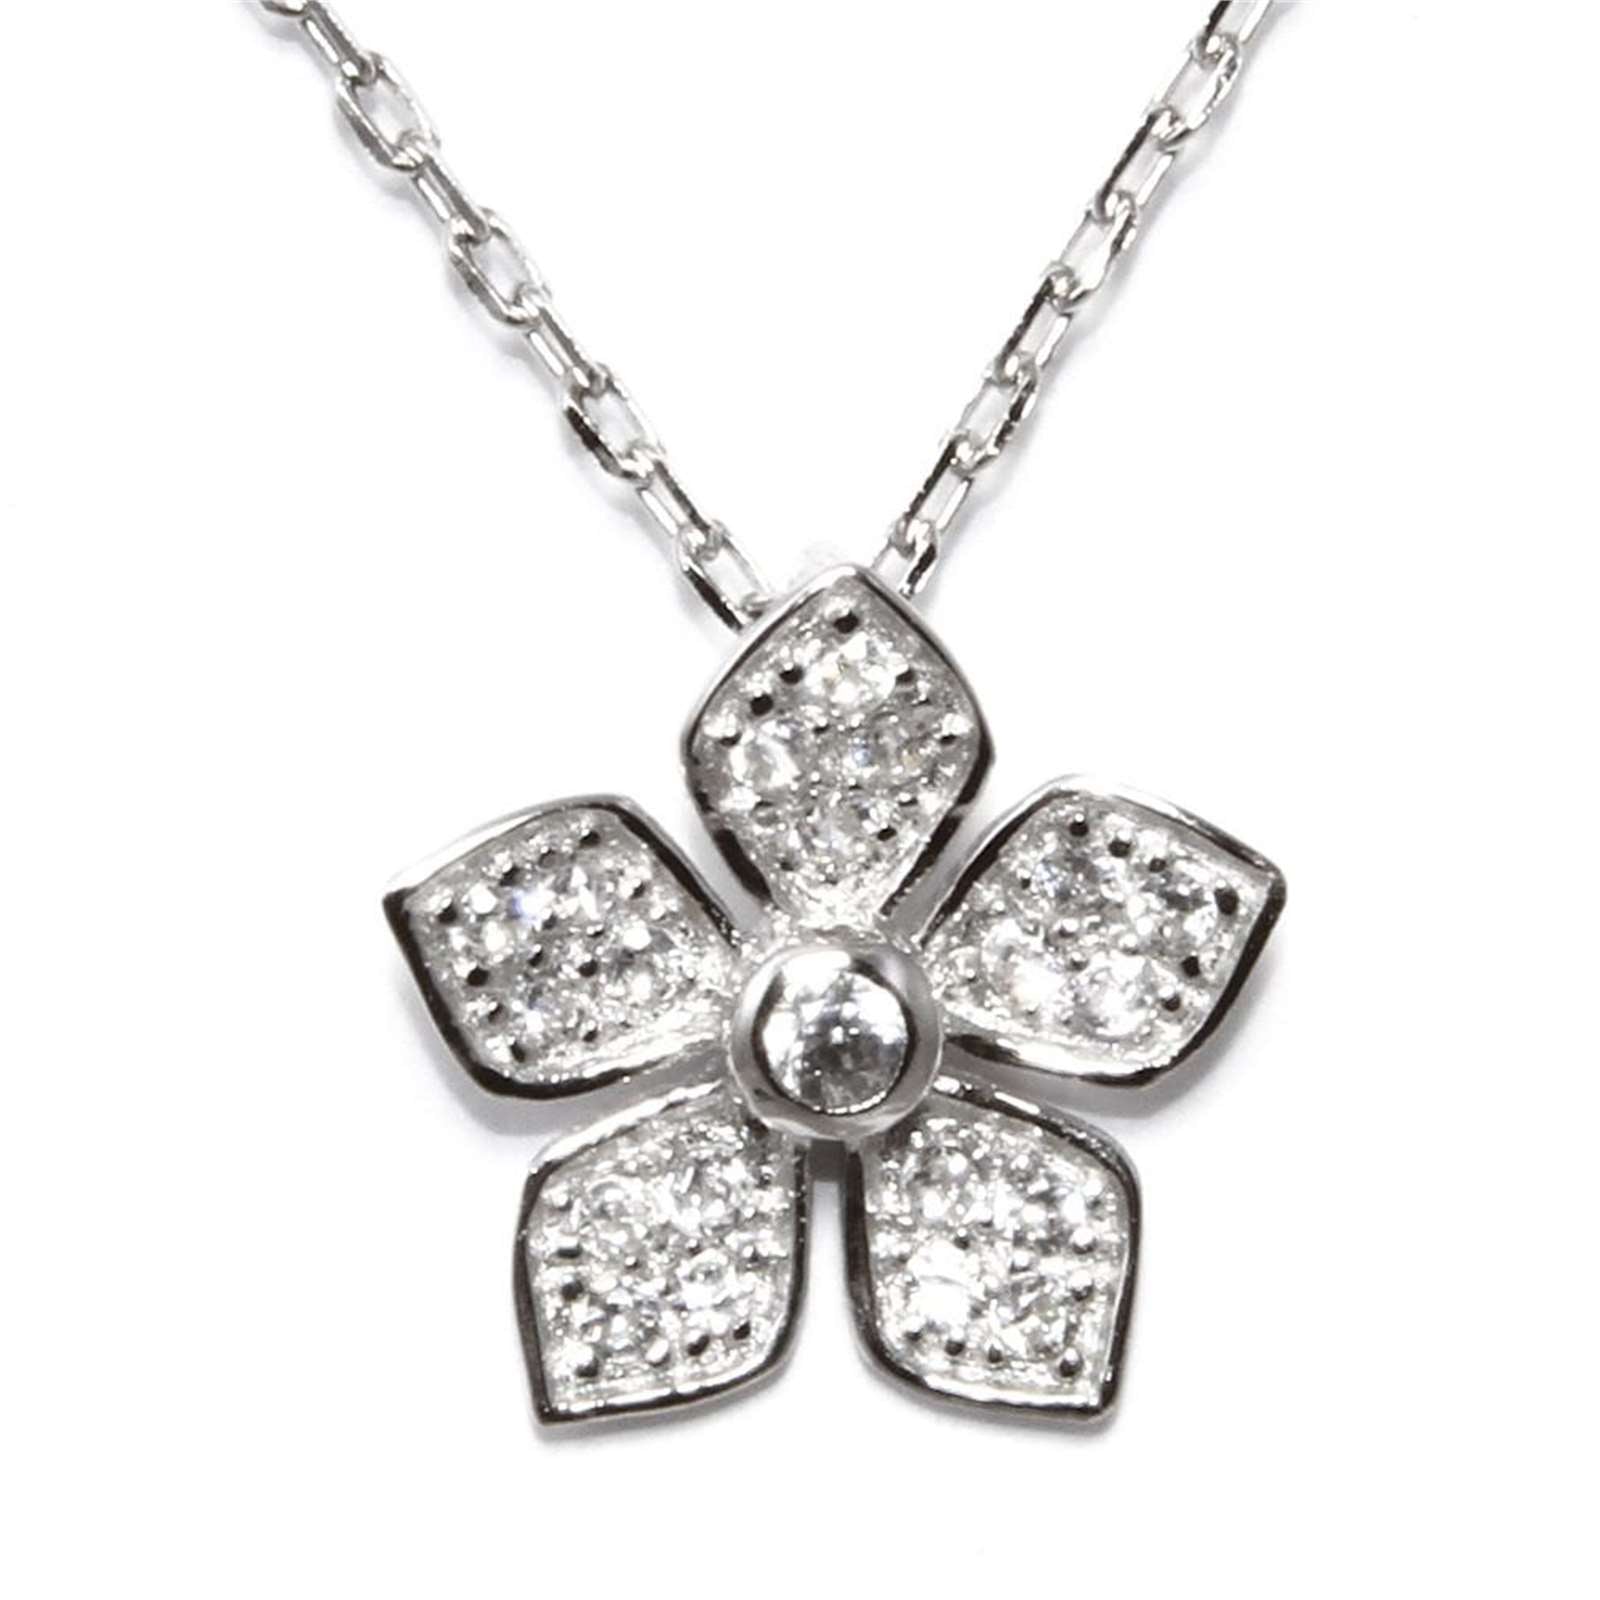 Athra Women Pave Floral Bridal Necklace